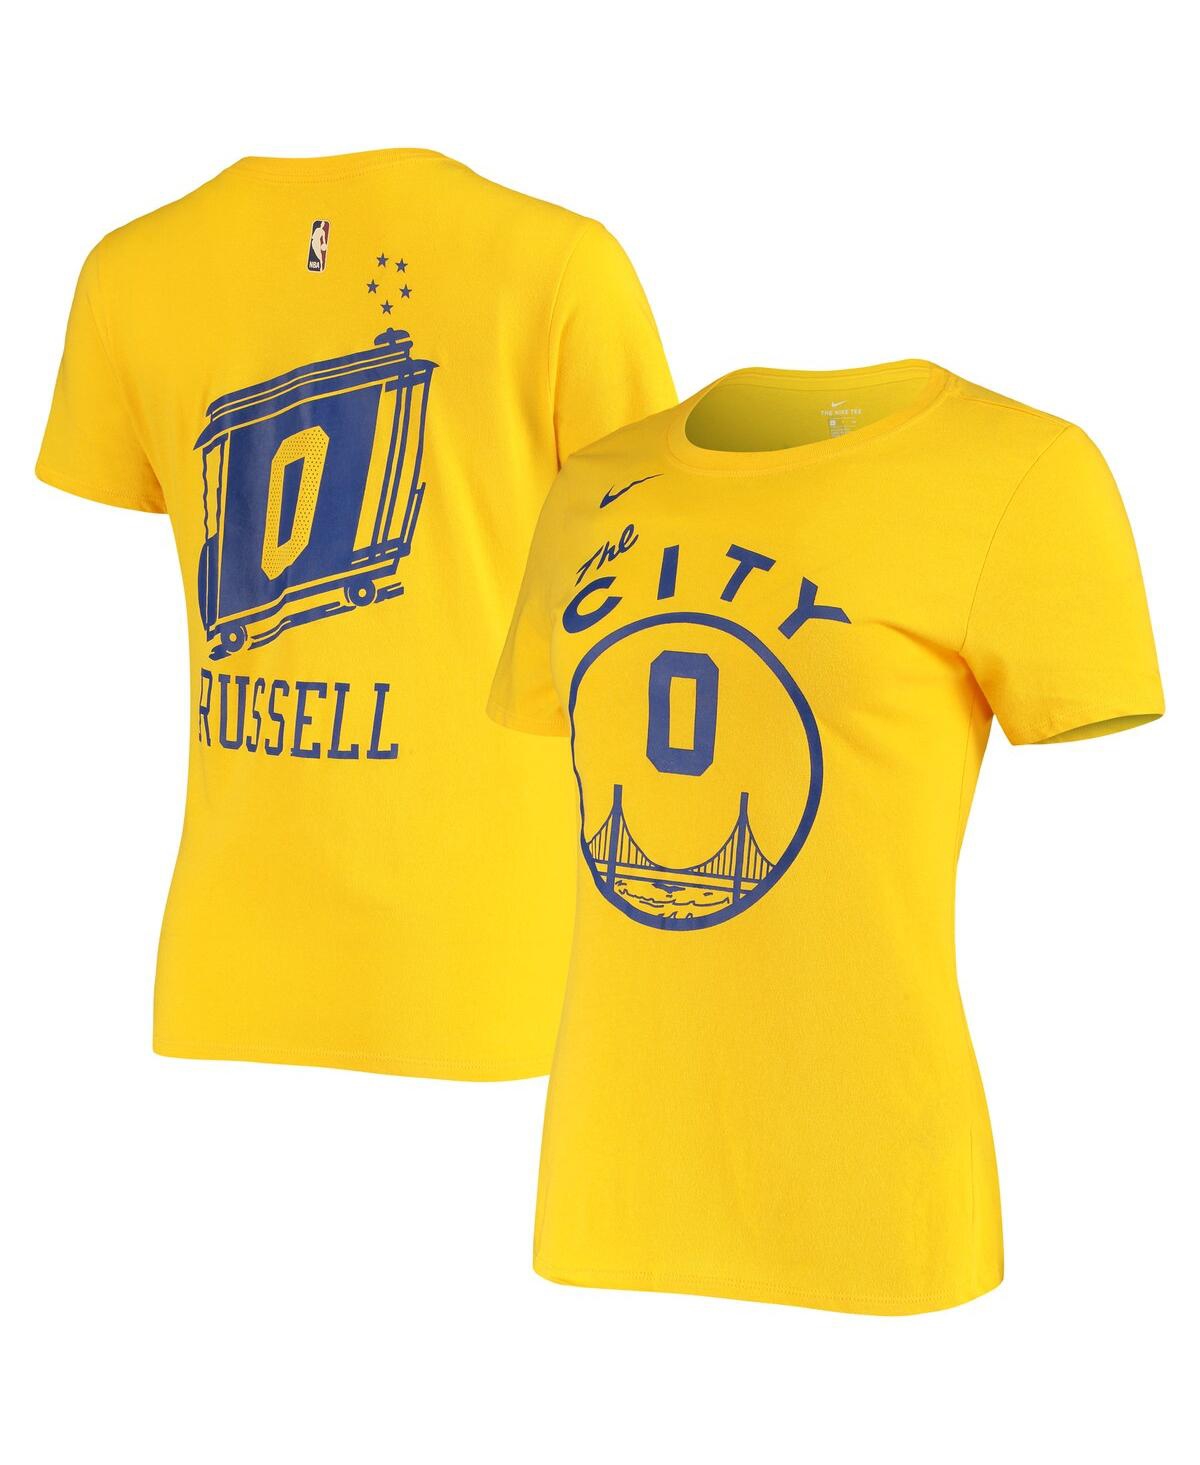 NIKE WOMEN'S NIKE D'ANGELO RUSSELL GOLD GOLDEN STATE WARRIORS HARDWOOD CLASSICS NAME AND NUMBER PERFORMAN